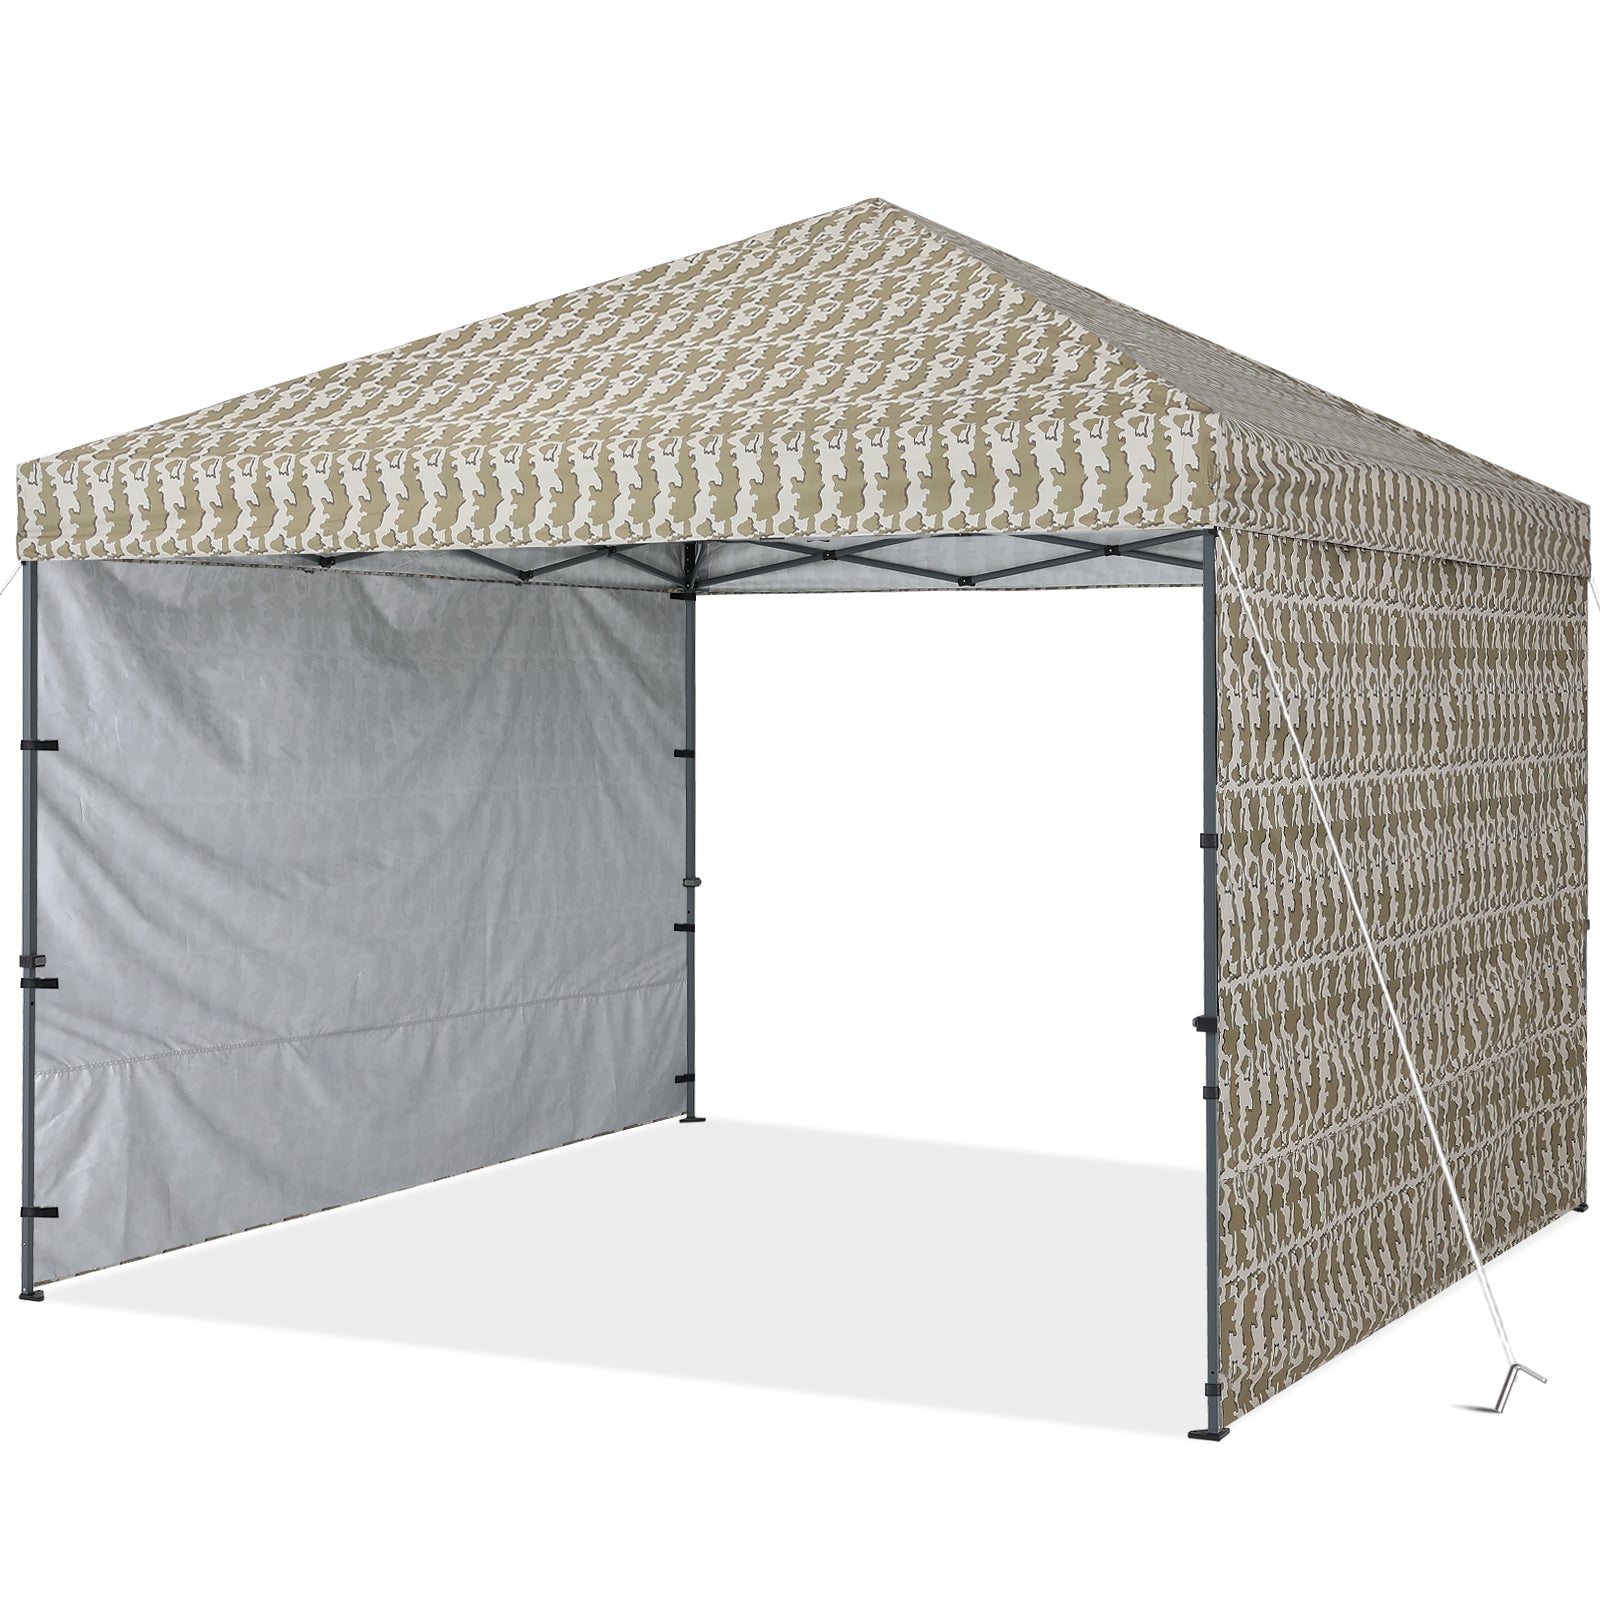 Outdoor Easy Pop up 10x10 Canopy Tent With Graphic Print and 2 Sun Walls